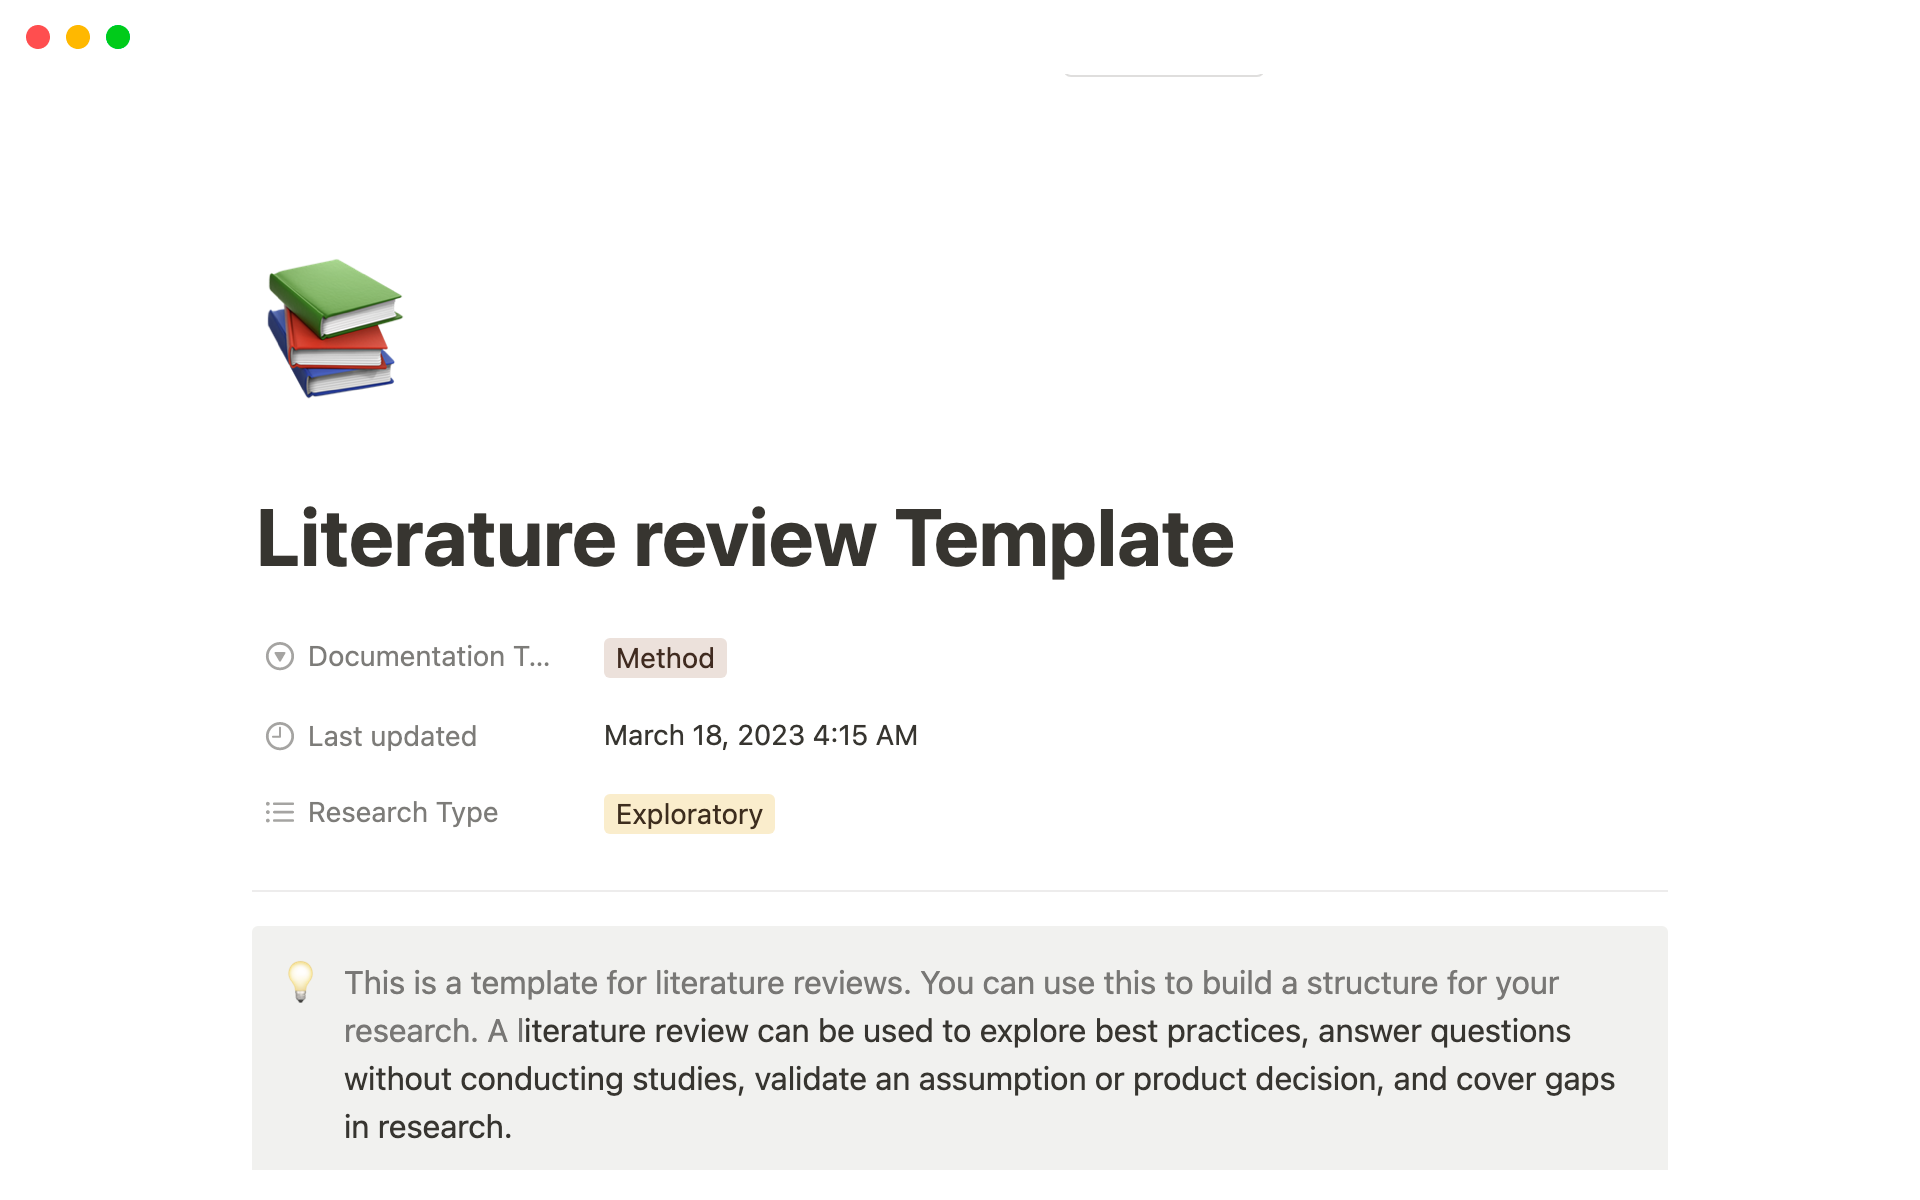 This template helps UX Researchers set up and plan for literature research as a method for their research project